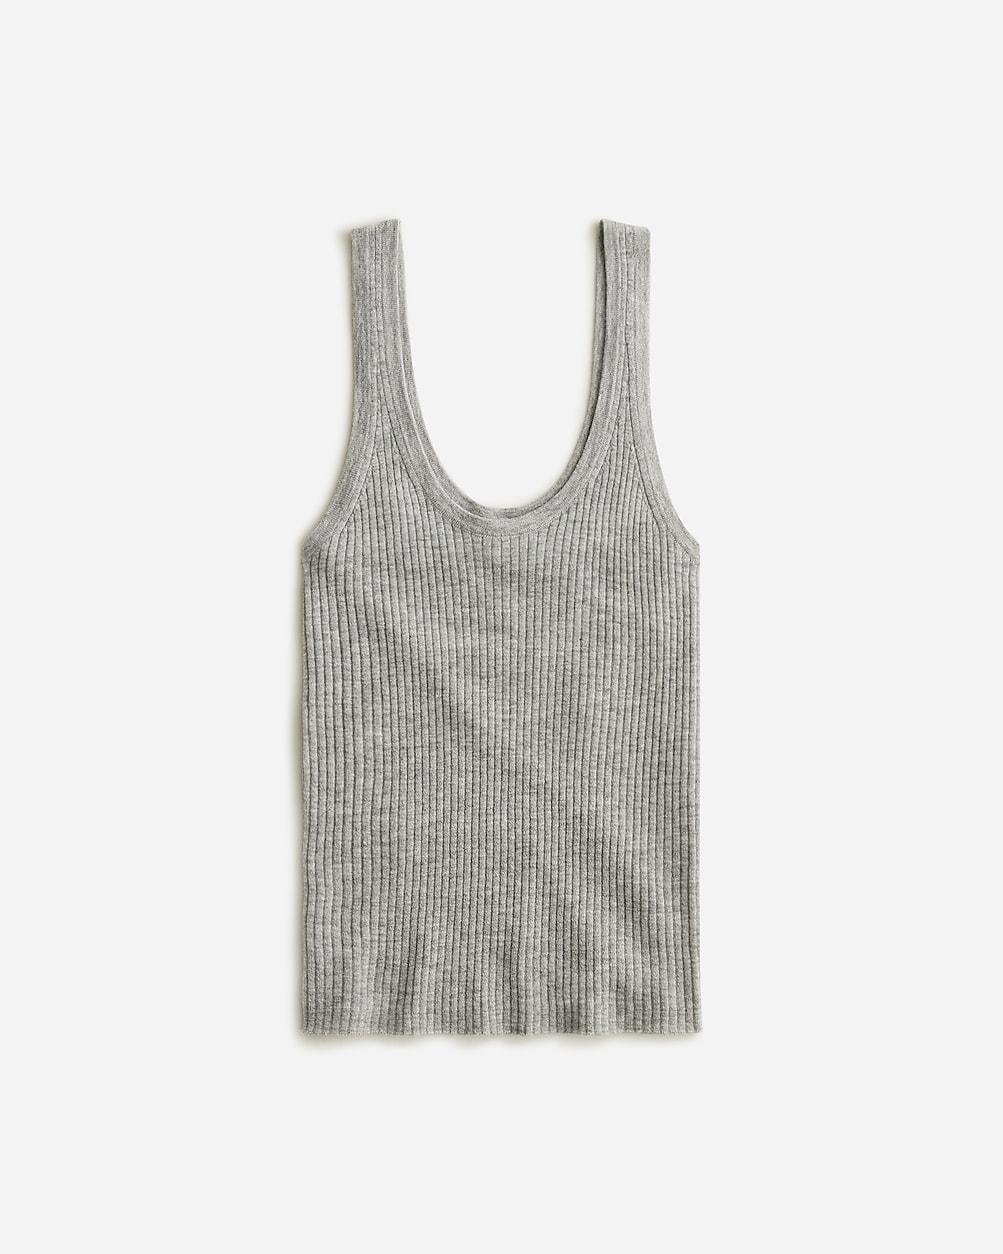 Featherweight cashmere ribbed tank top by J.CREW